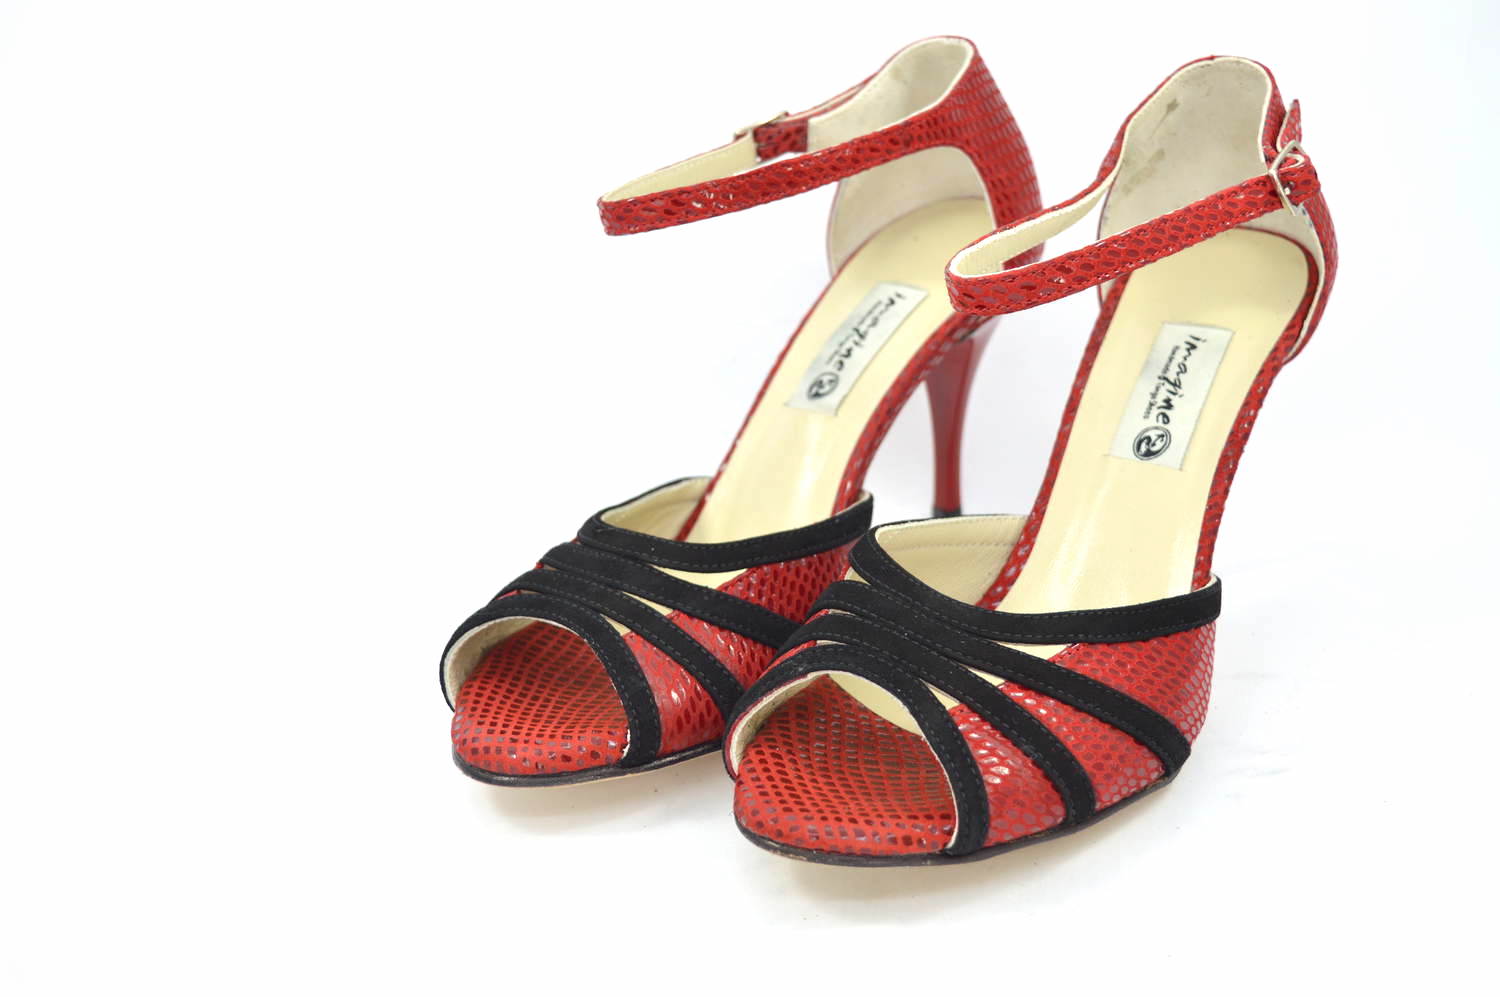 Women's Tango Shoe, peep toe style, with impressive red snake leather and black suede